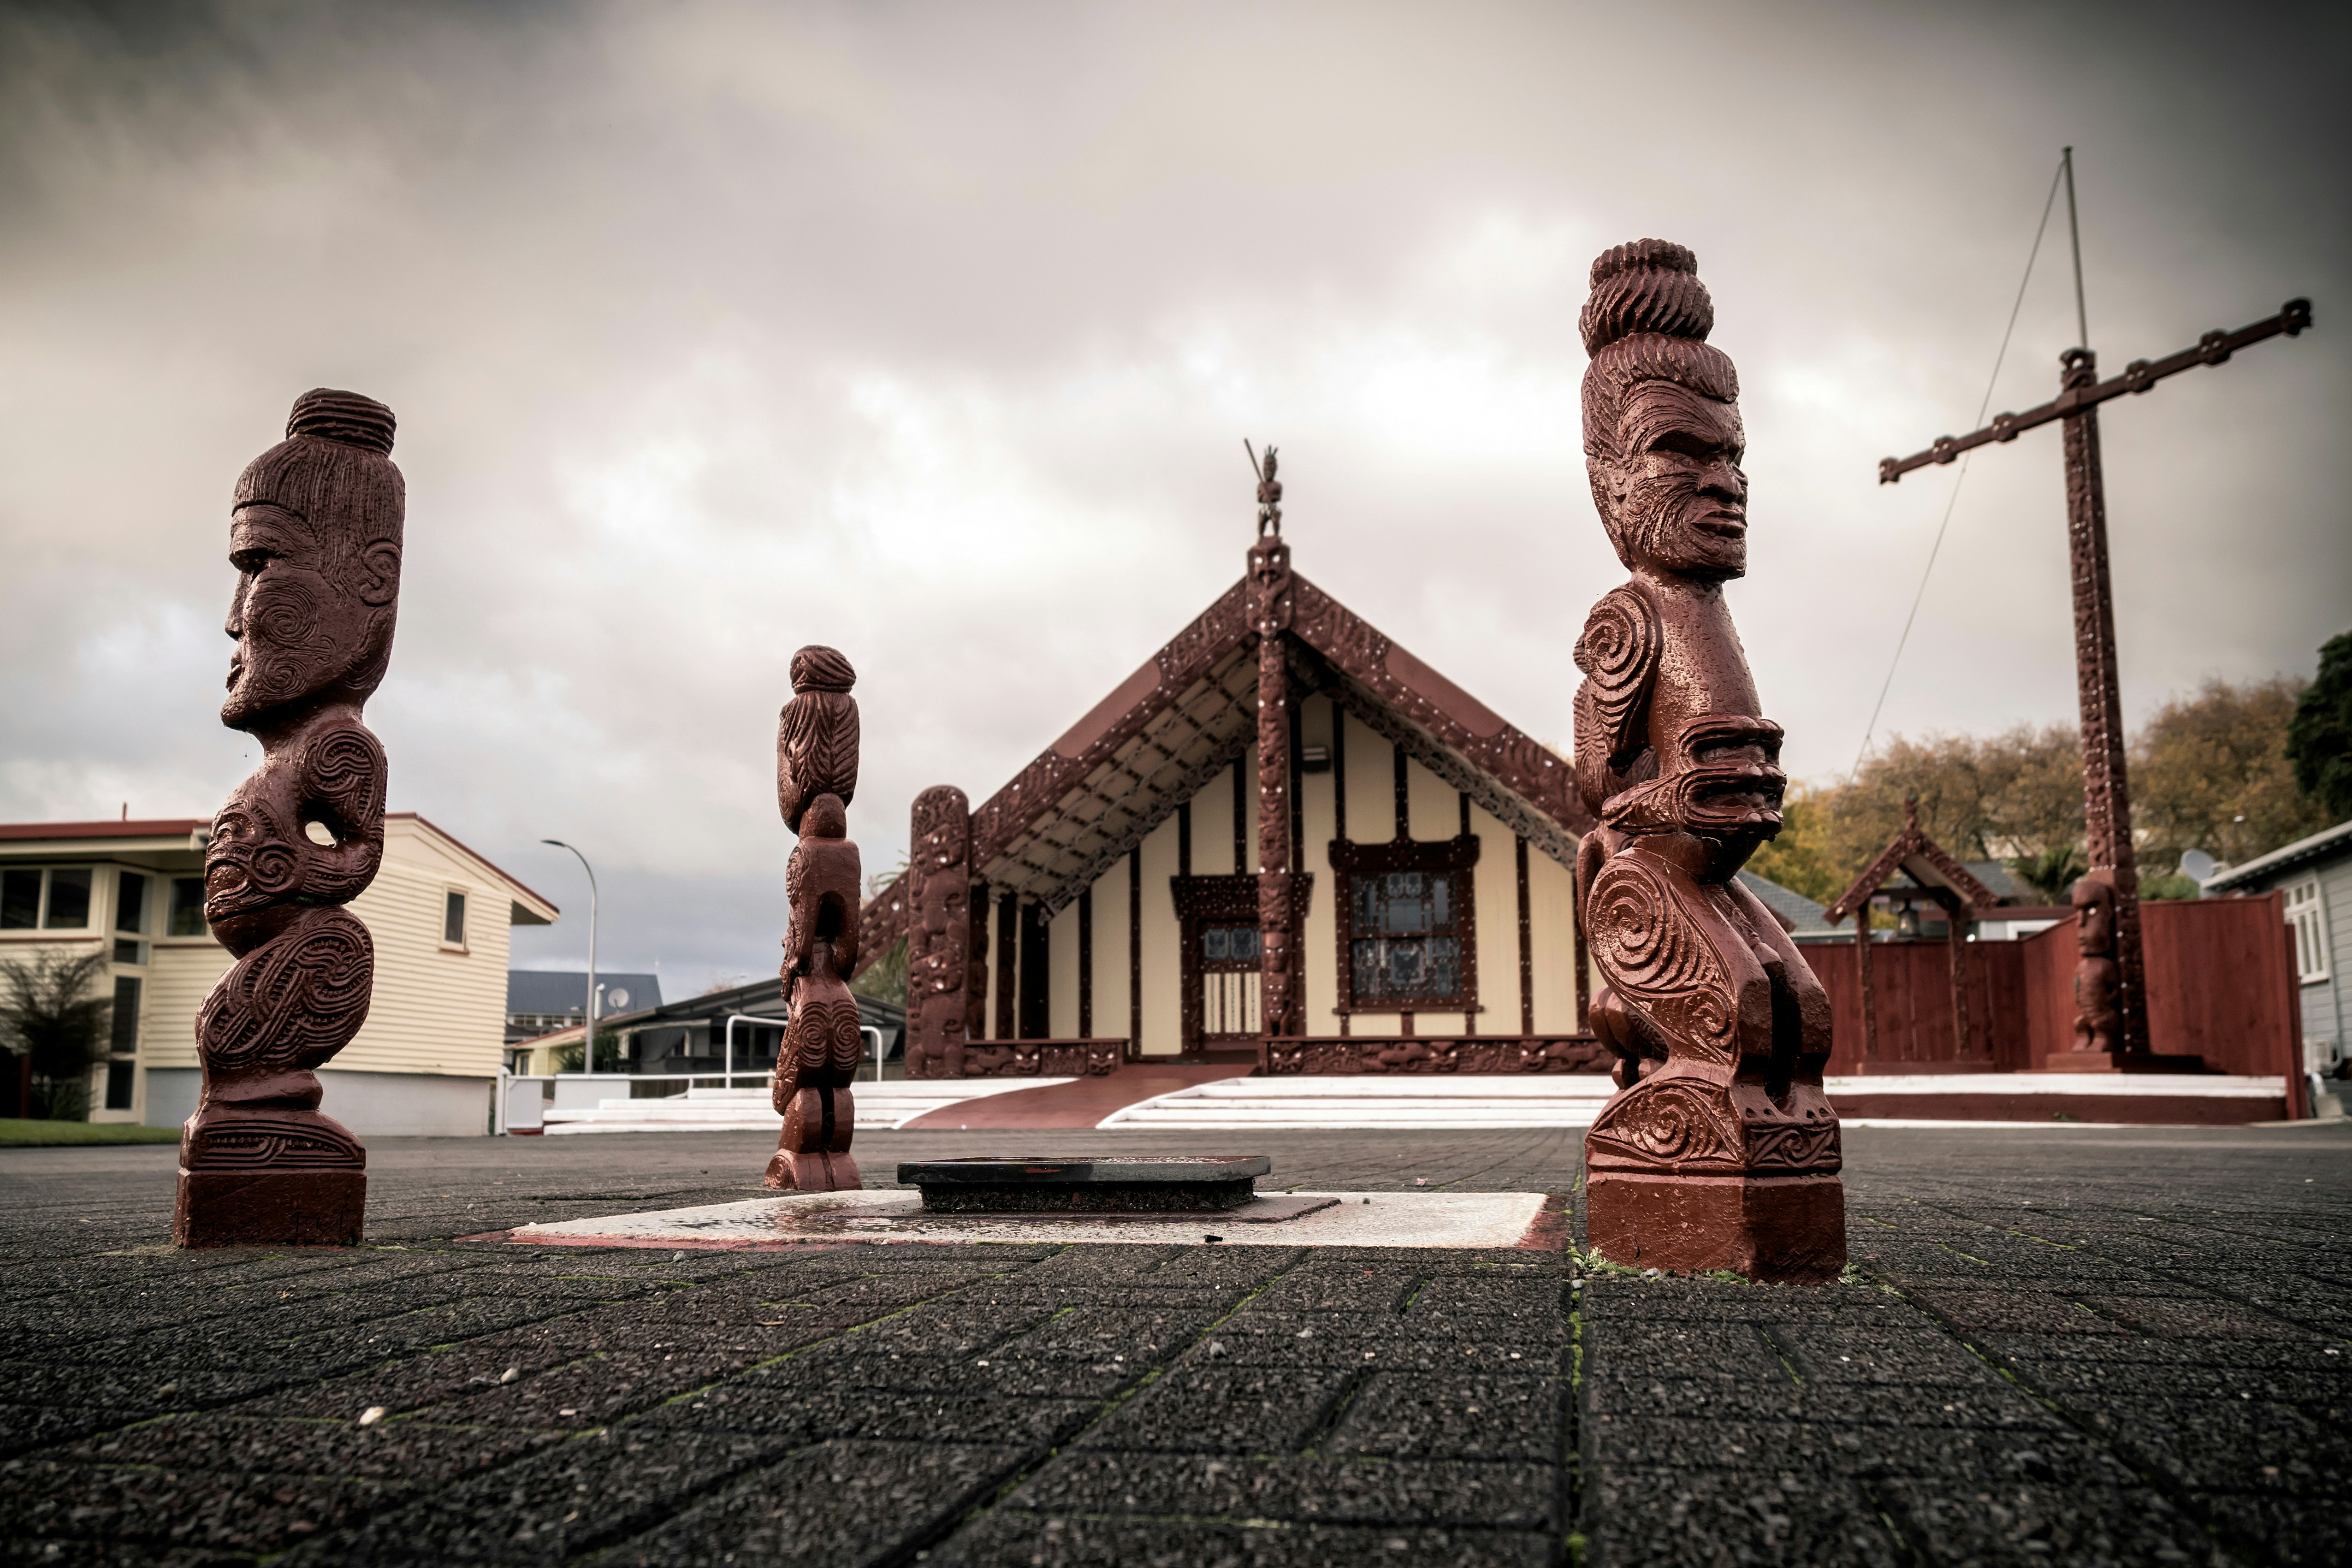 Intricately carved wooden sculptures of people stand outside the Tama-te-Kapua Meeting House in Ohinemutu, Rotorua.